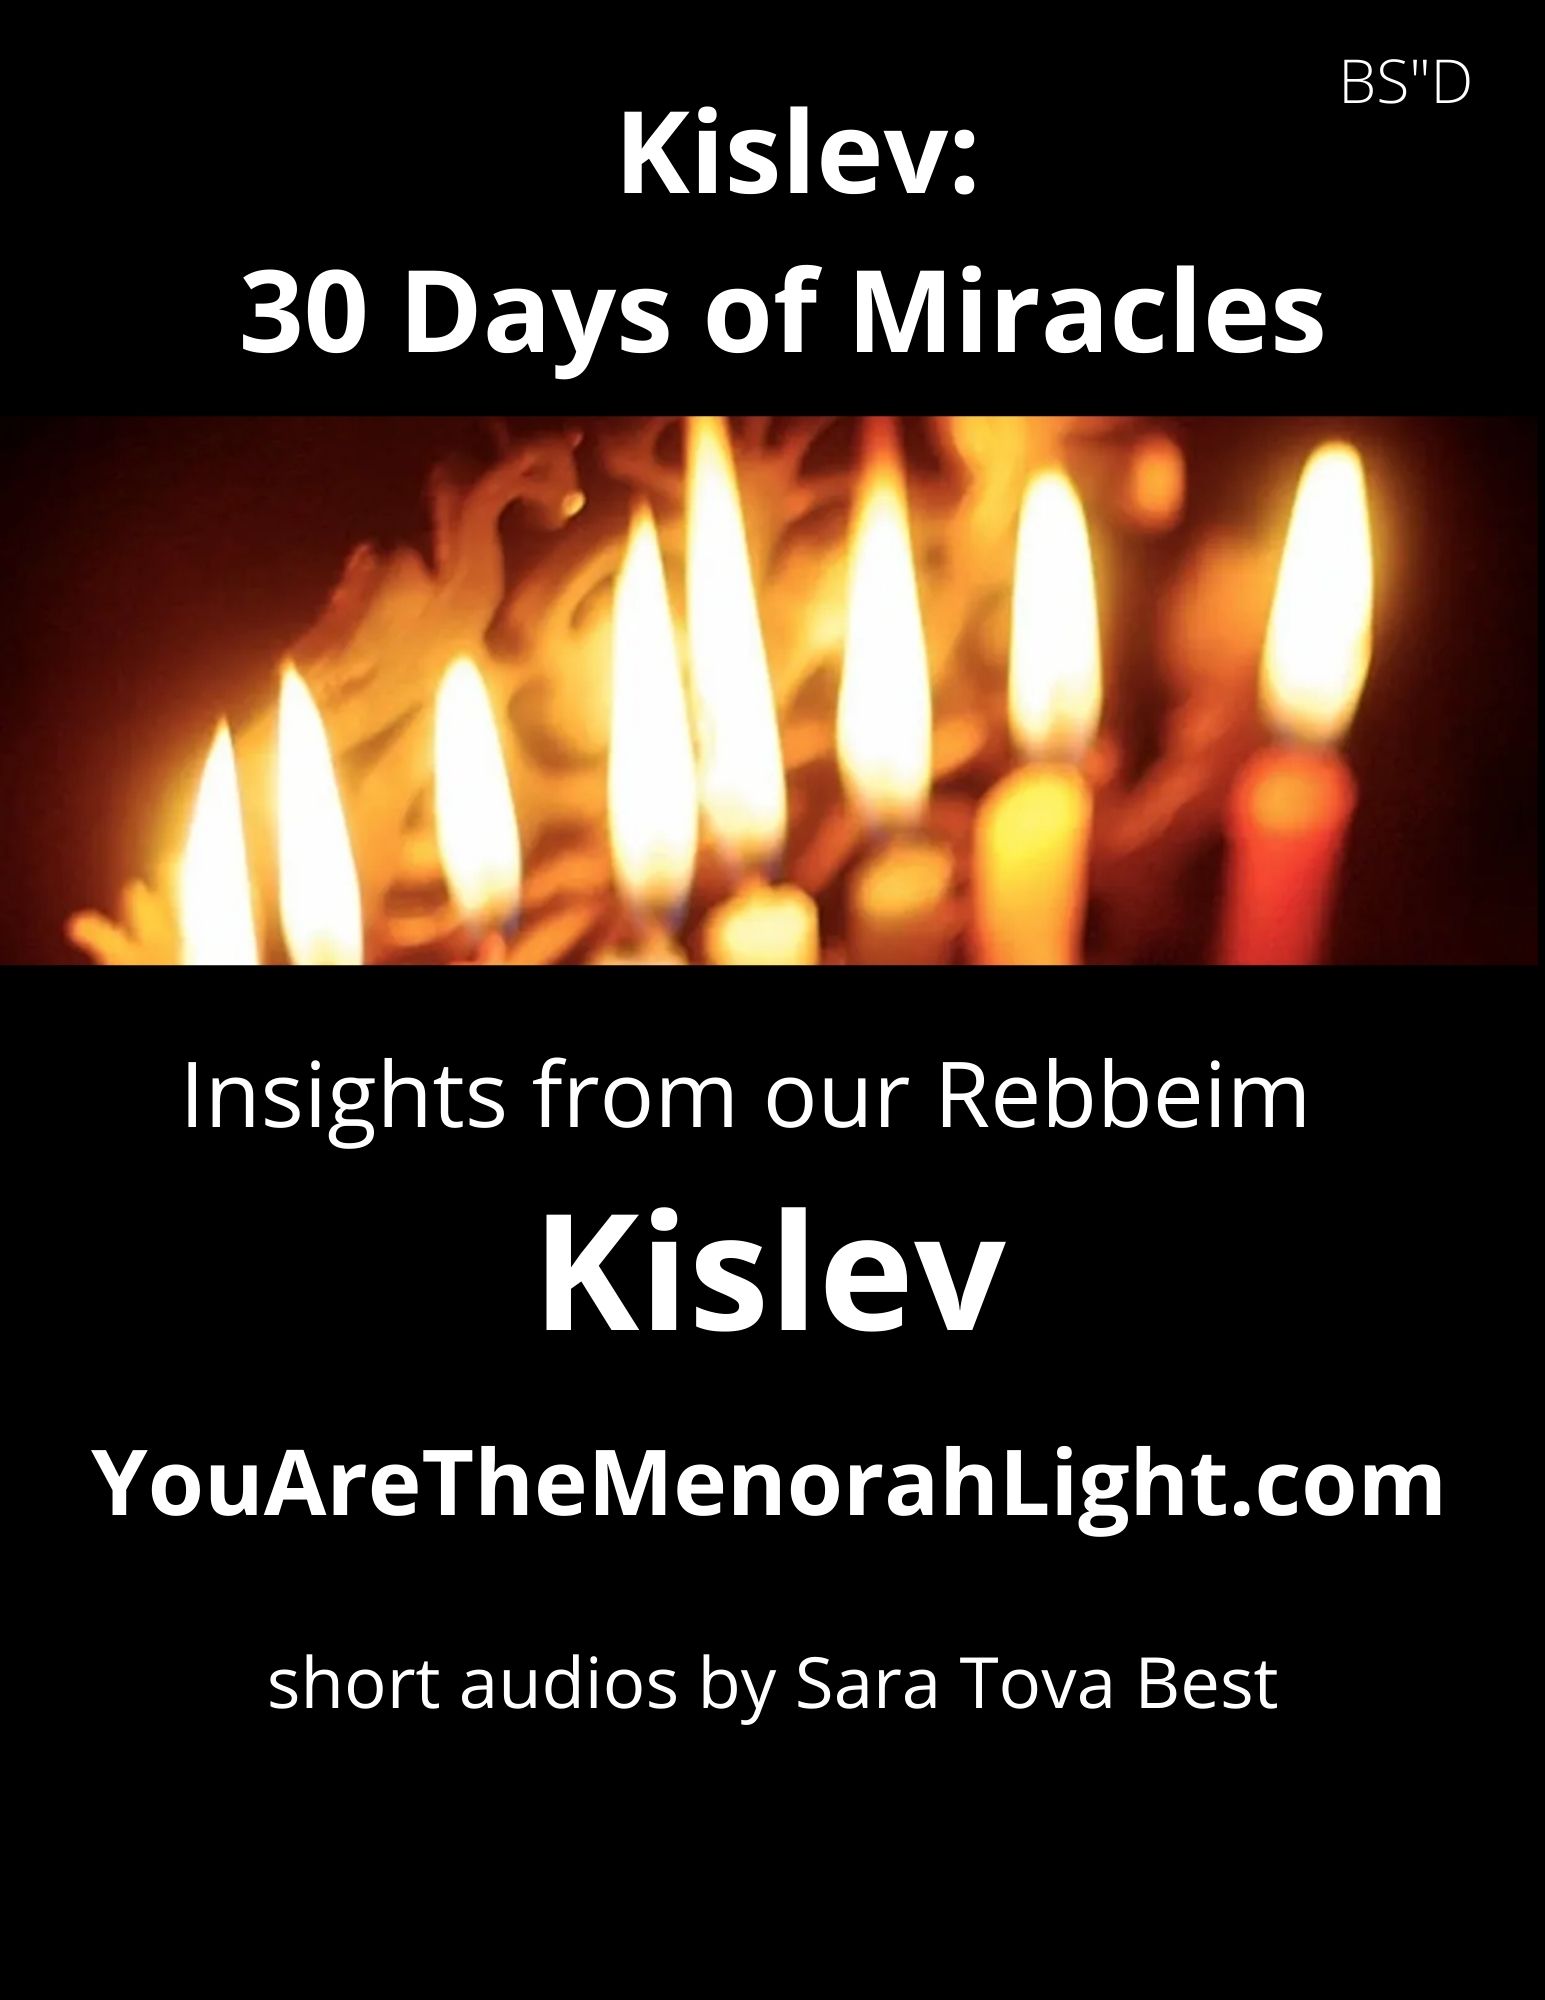 3 kislev: With the energy of 3.. we see Miracles